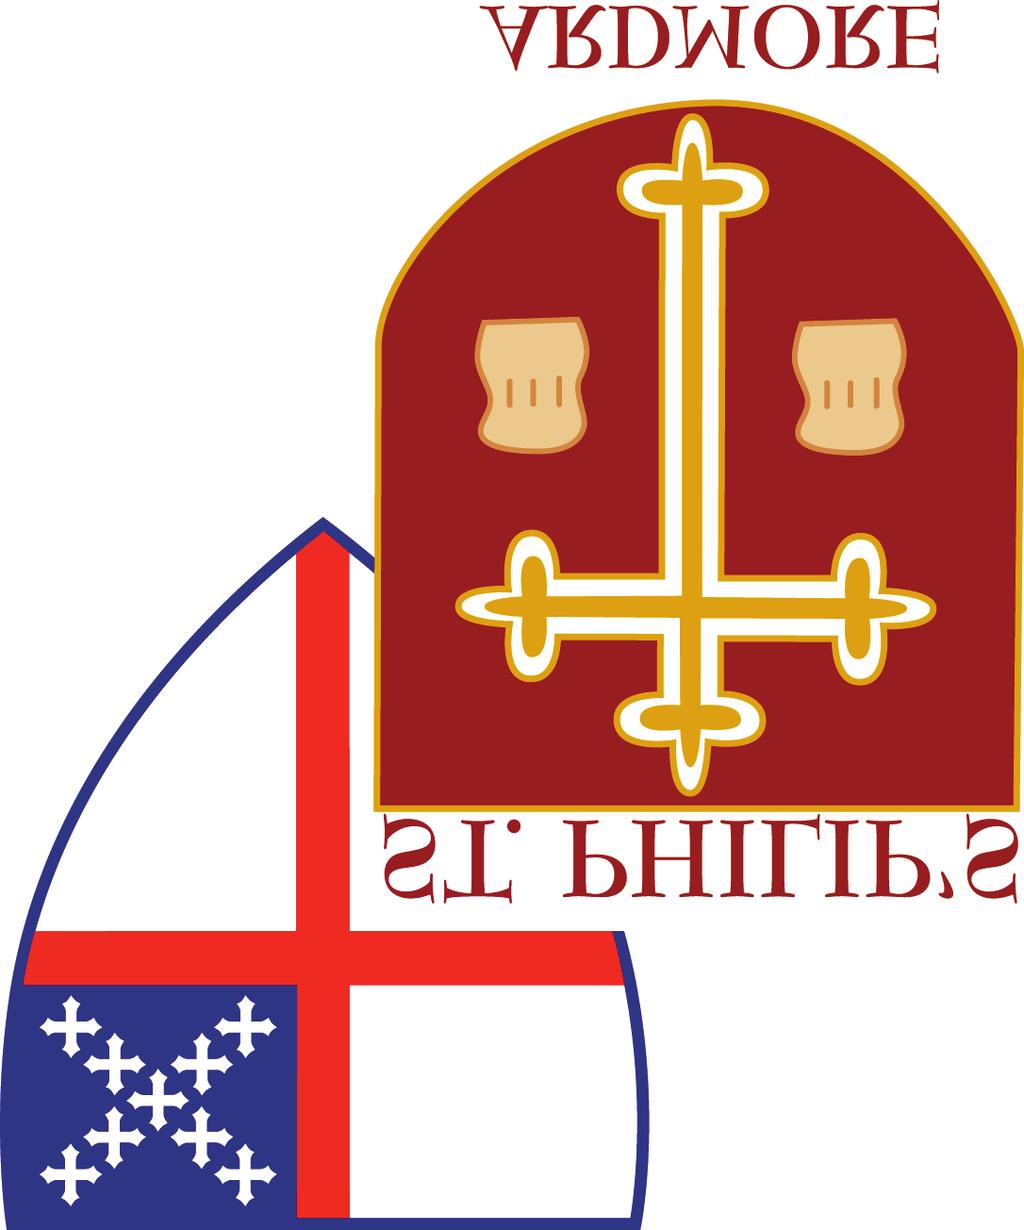 St. Philip s The Episcopal Church in Ardmore, where we are encouraged to actively love and respect the dignity of all. Sunday Worship Schedule 10:00 a.m. Traditional Mass with Hymns 11:15 a.m. Sunday Brunch/Coffee Hour Weekly Worship Schedule 7:15 a.